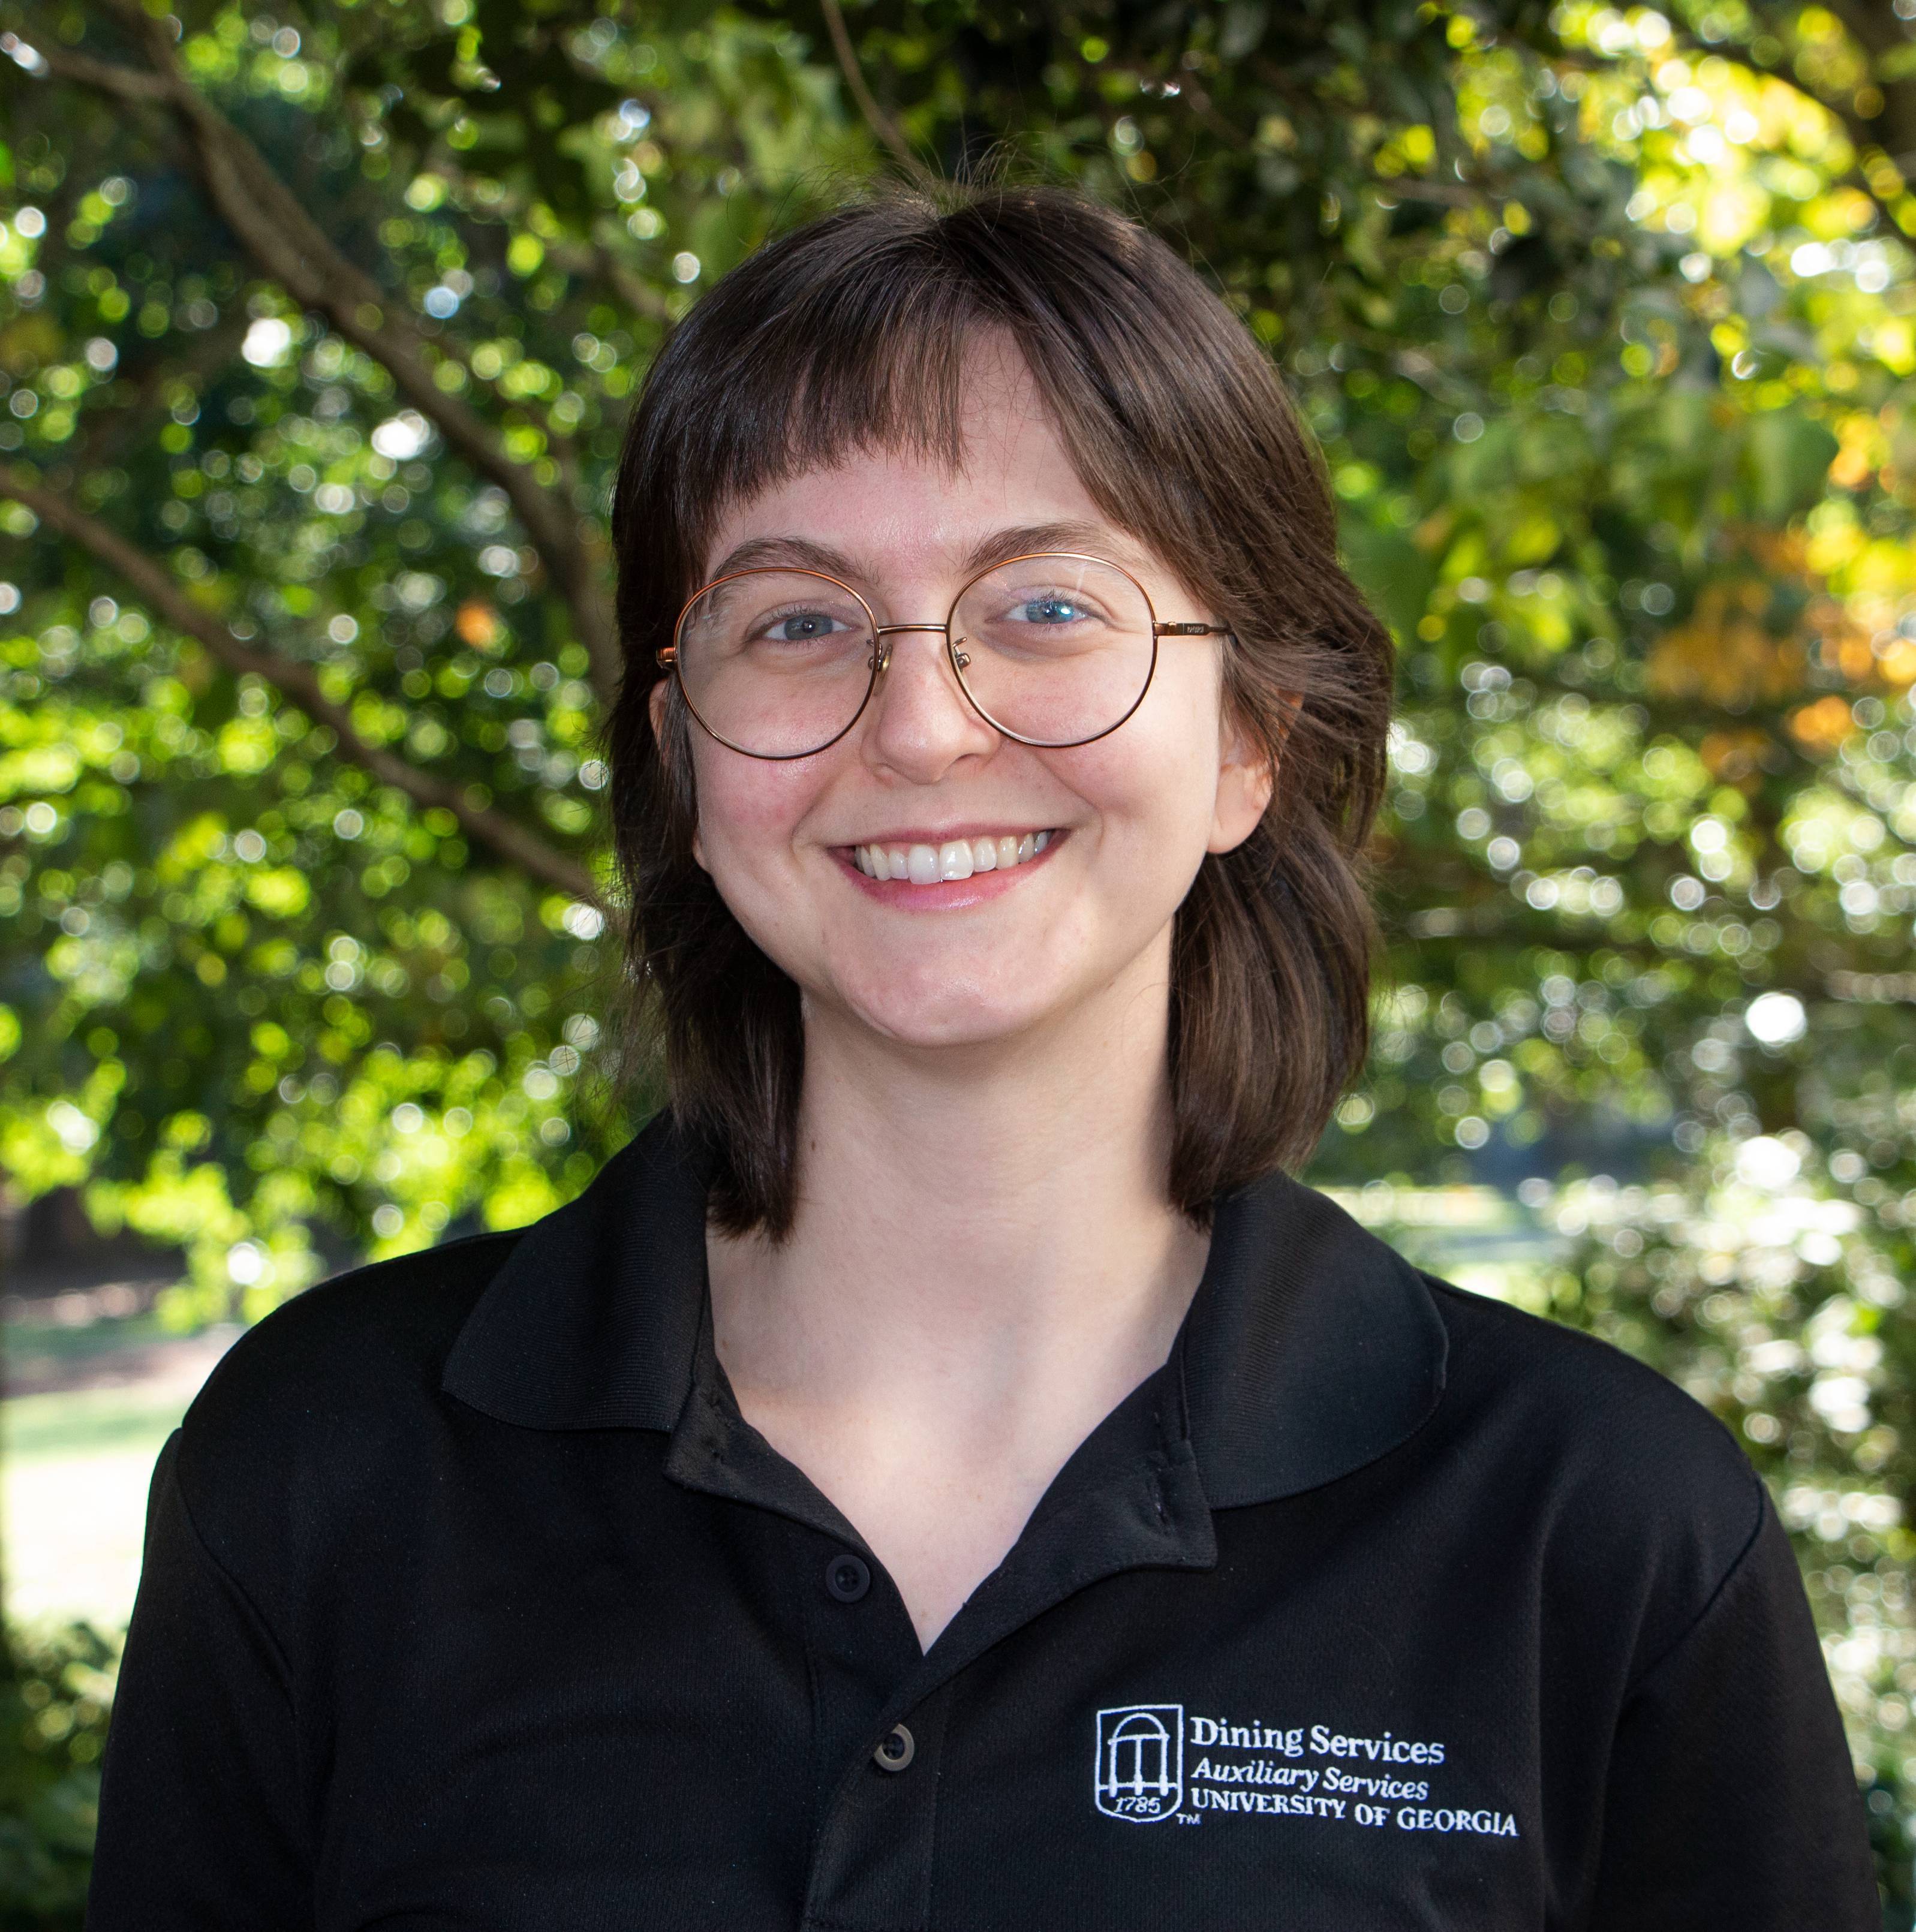 A woman with shoulder-length brown hair wearing round frame glasses and a black shirt with the words "Dining Services, Auxiliary Services, University of Georgia" smiles at the camera.